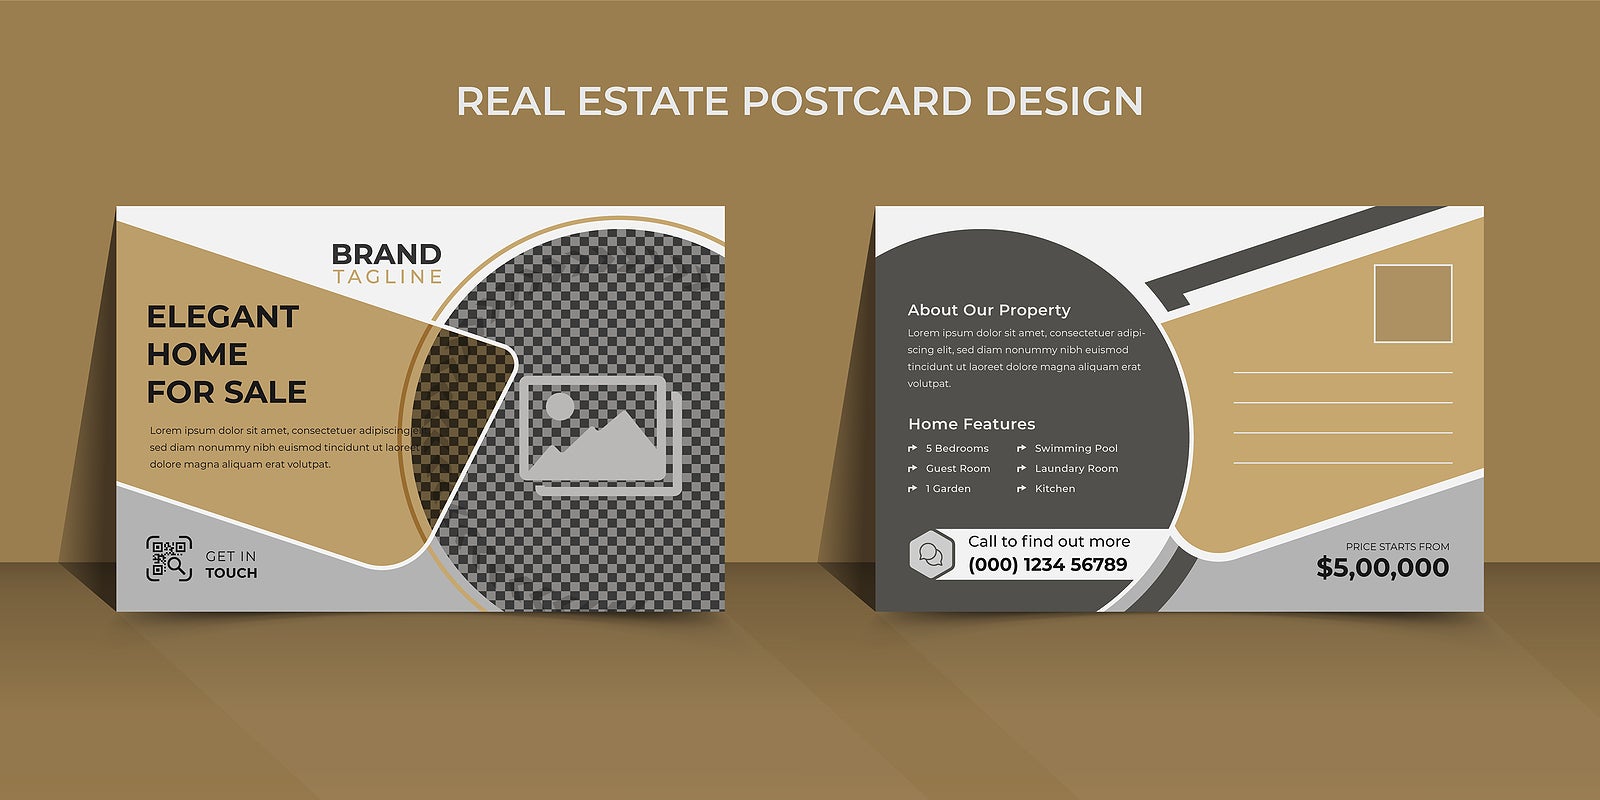 Real Estate Postcards Are Still Effective – Here’s How to Use Them